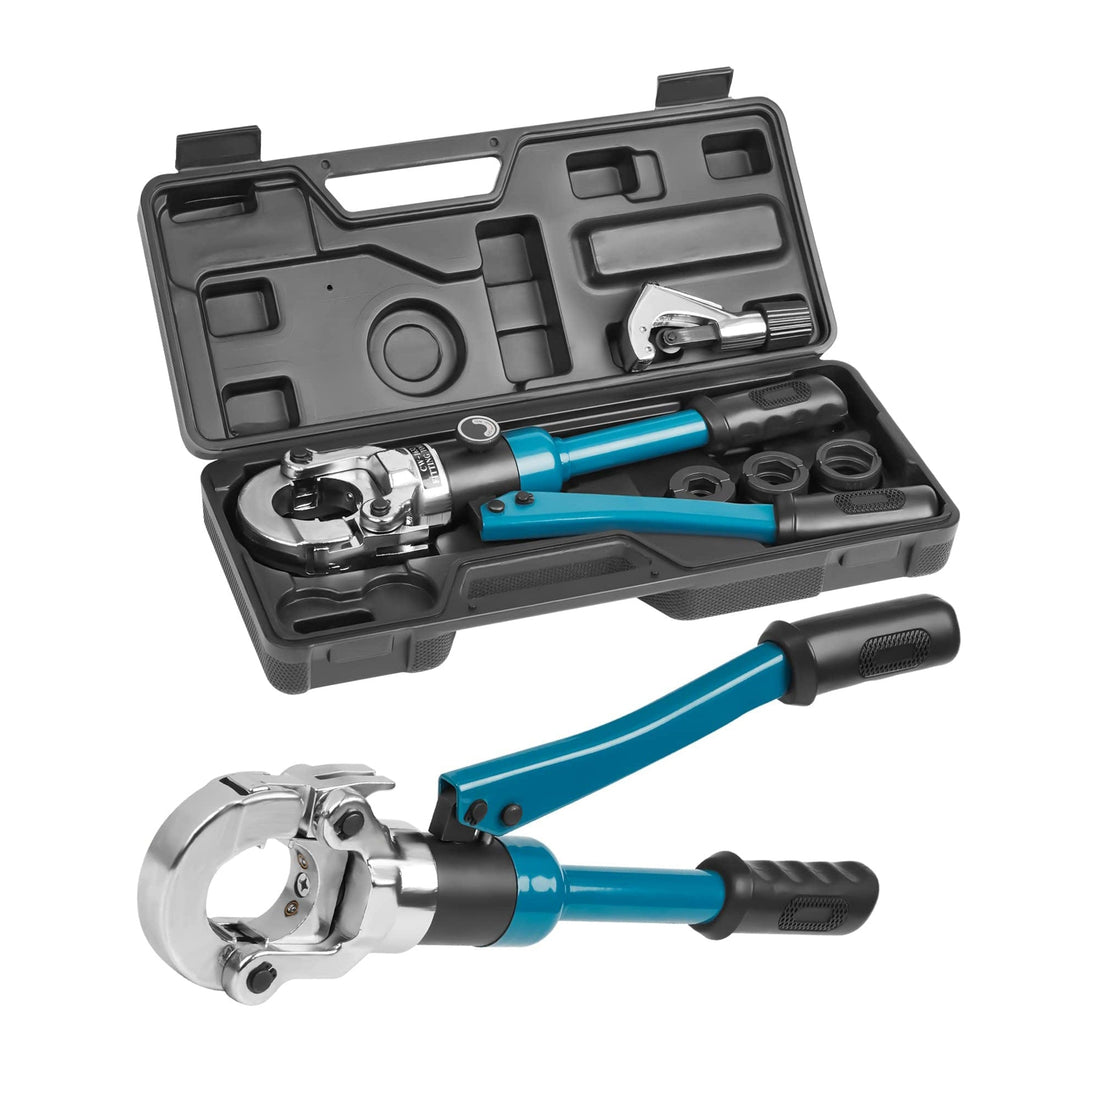 Copper Pipe Crimping Tool Kit with 1/2 Inch 3/4 Inch 1 Inch Jaw Copper Pipe Press Crimpers